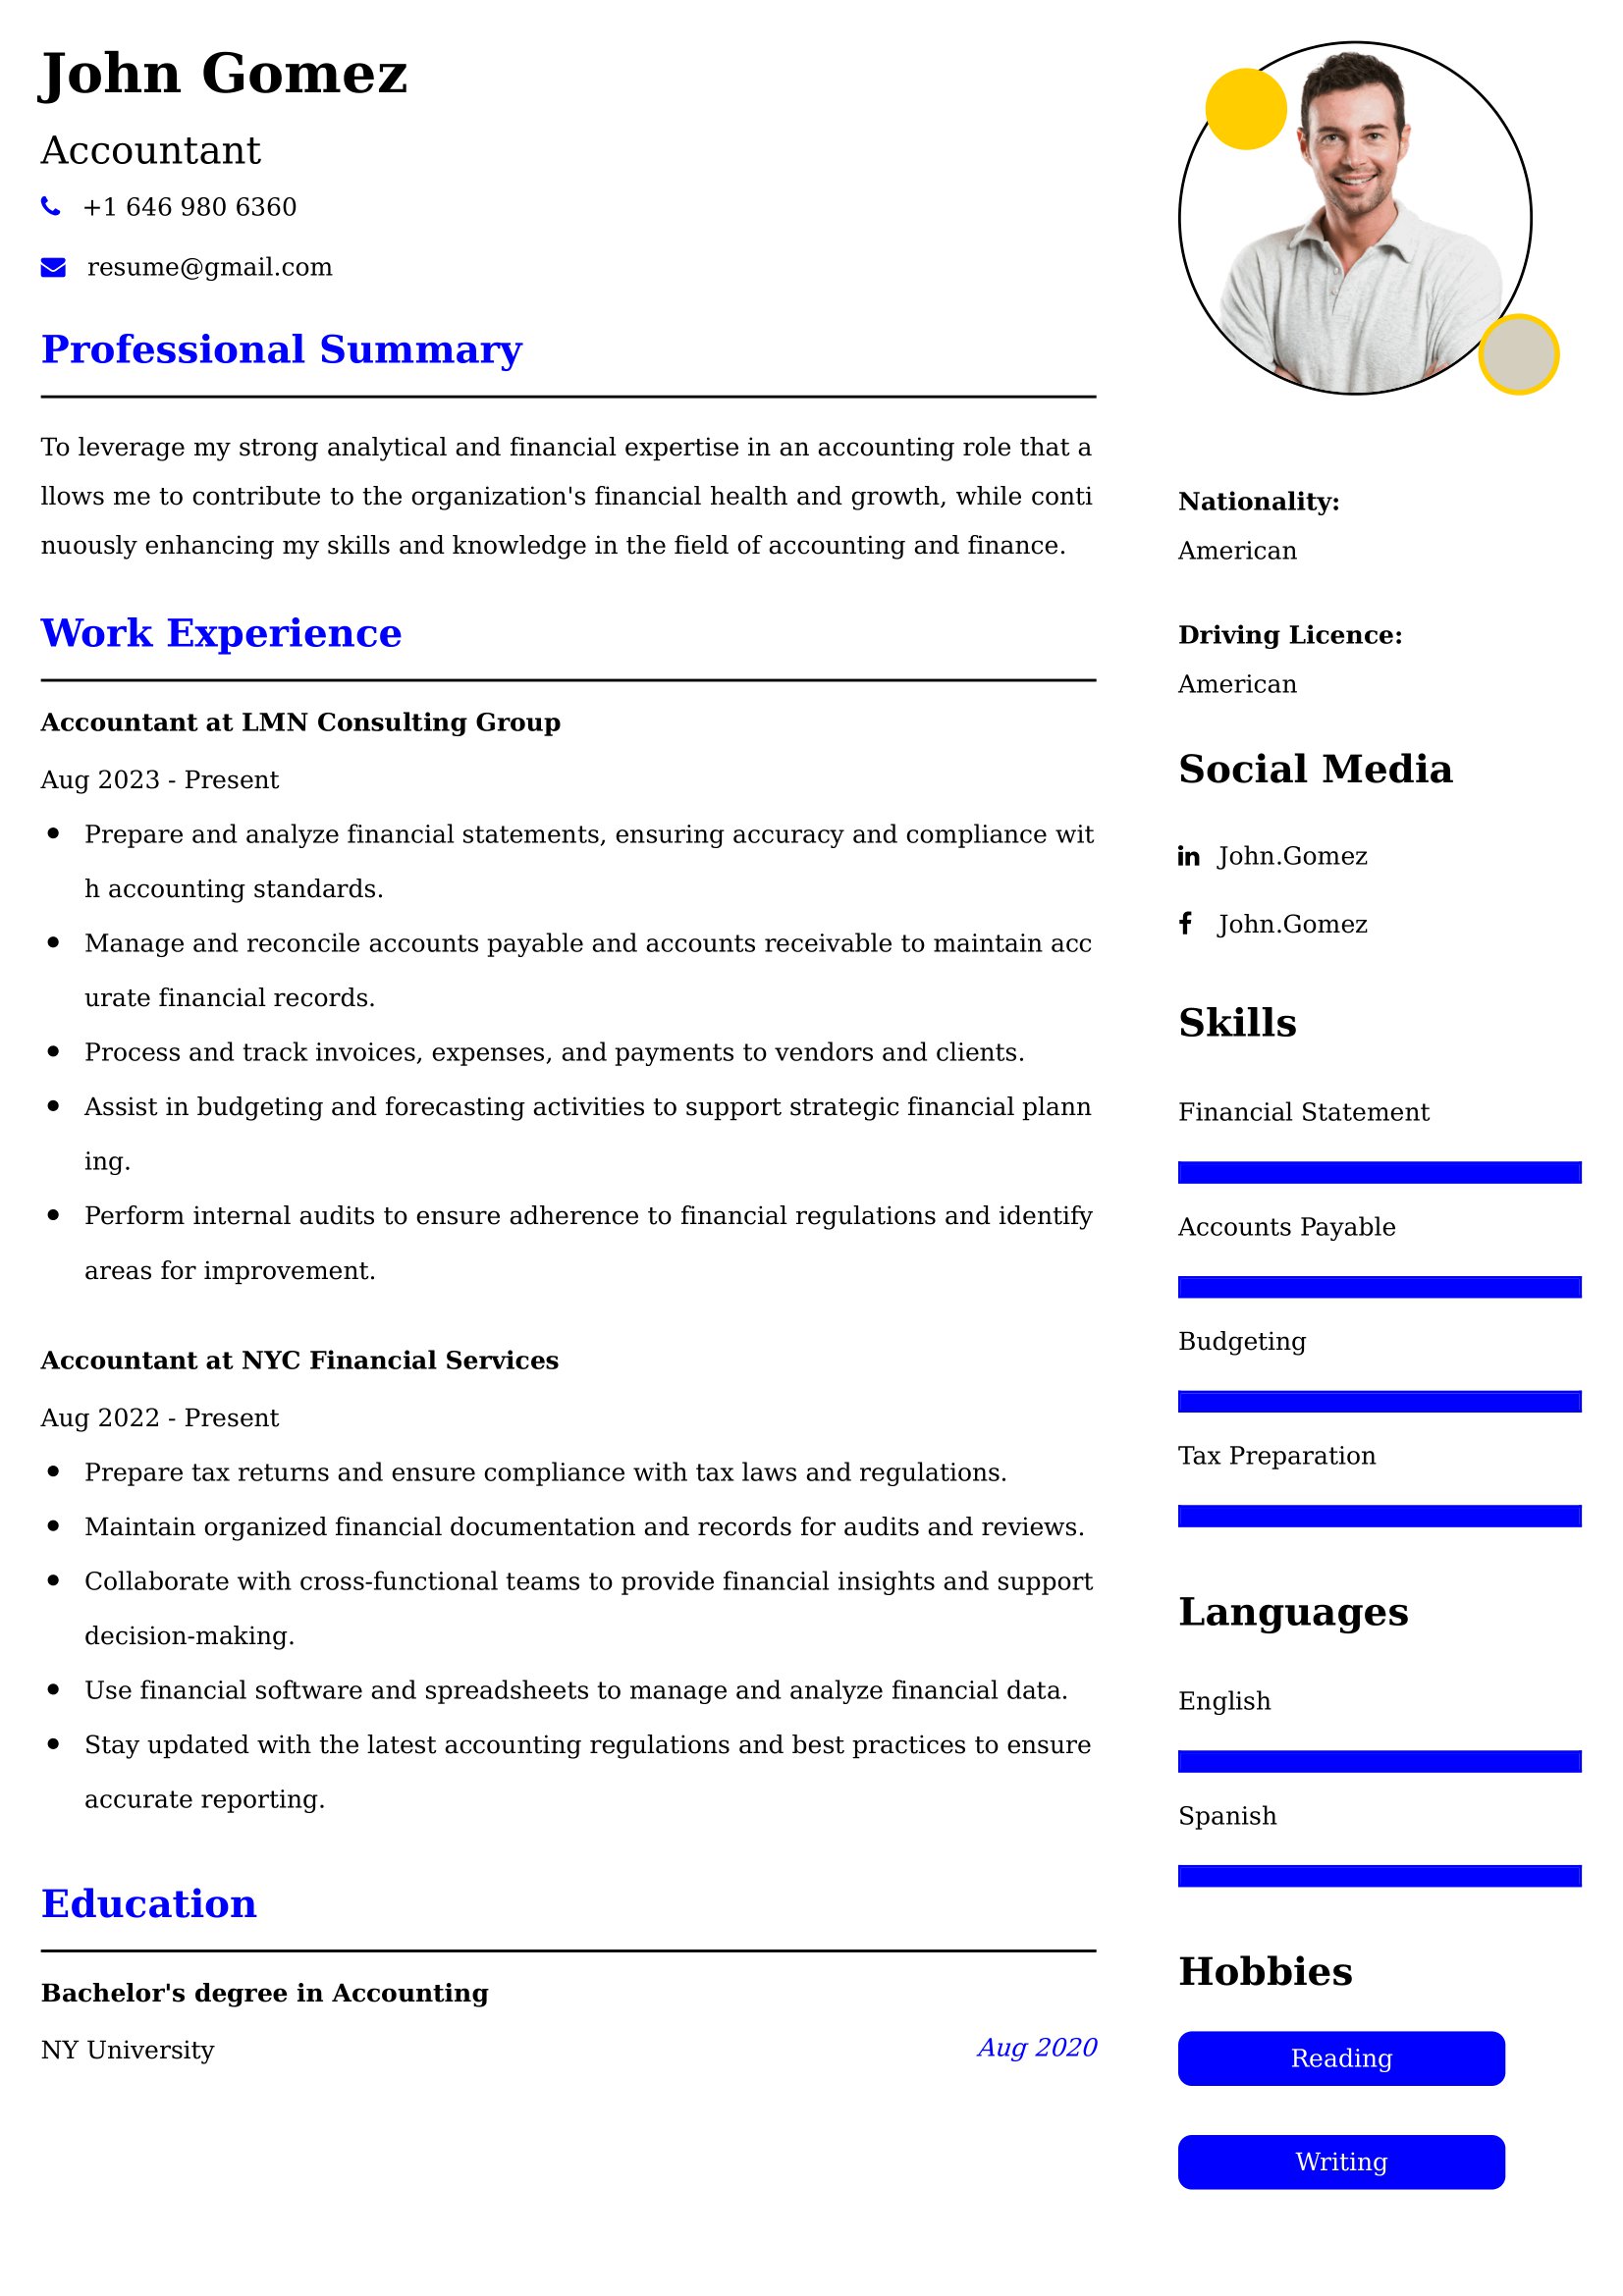 Best Accountant Resume Examples for UK